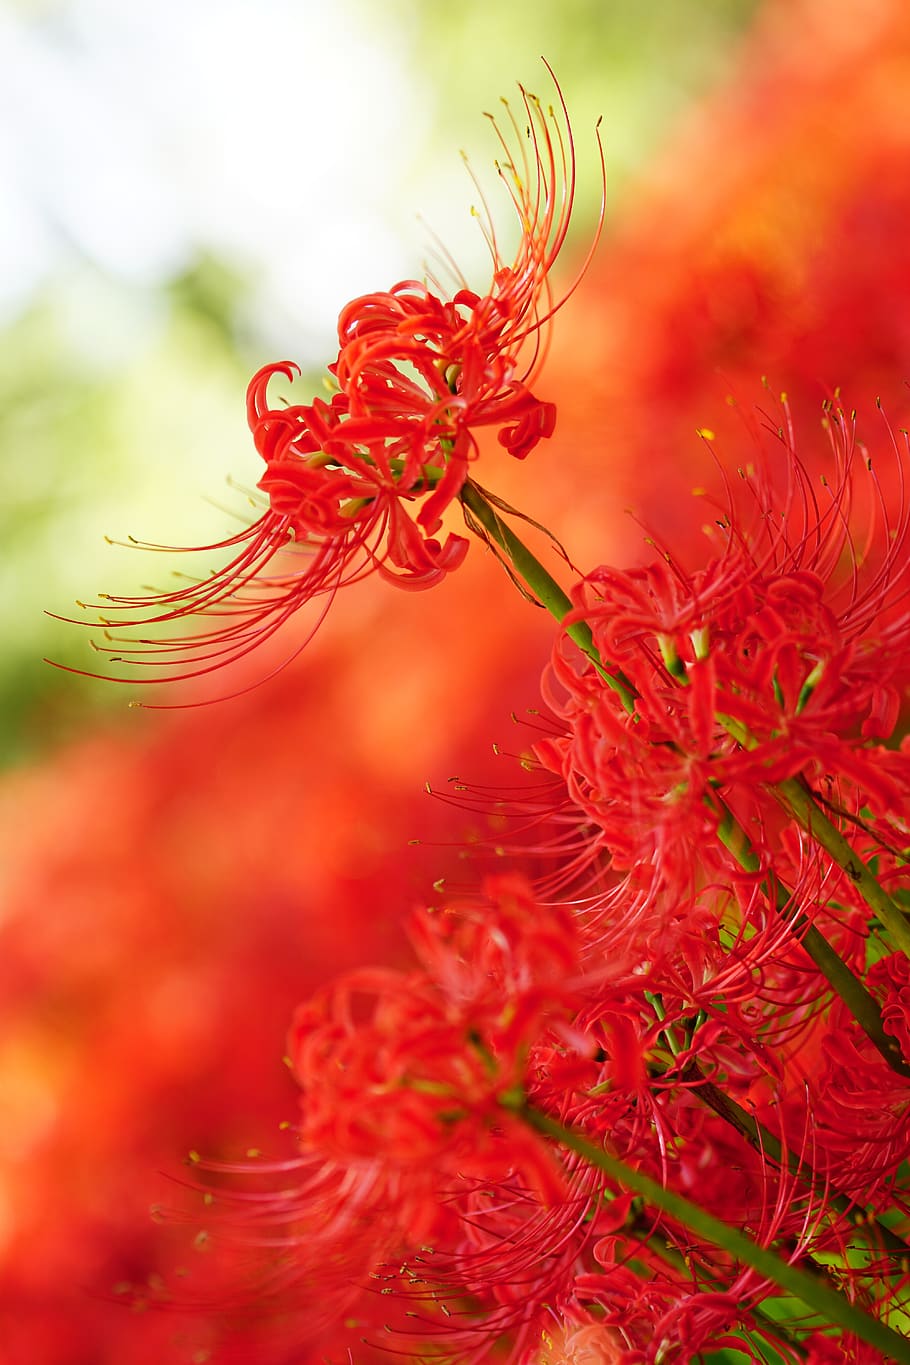 amaryllis, amaryllidaceae, spider lily, red flowers, higanbana, red, close-up, plant, beauty in nature, freshness